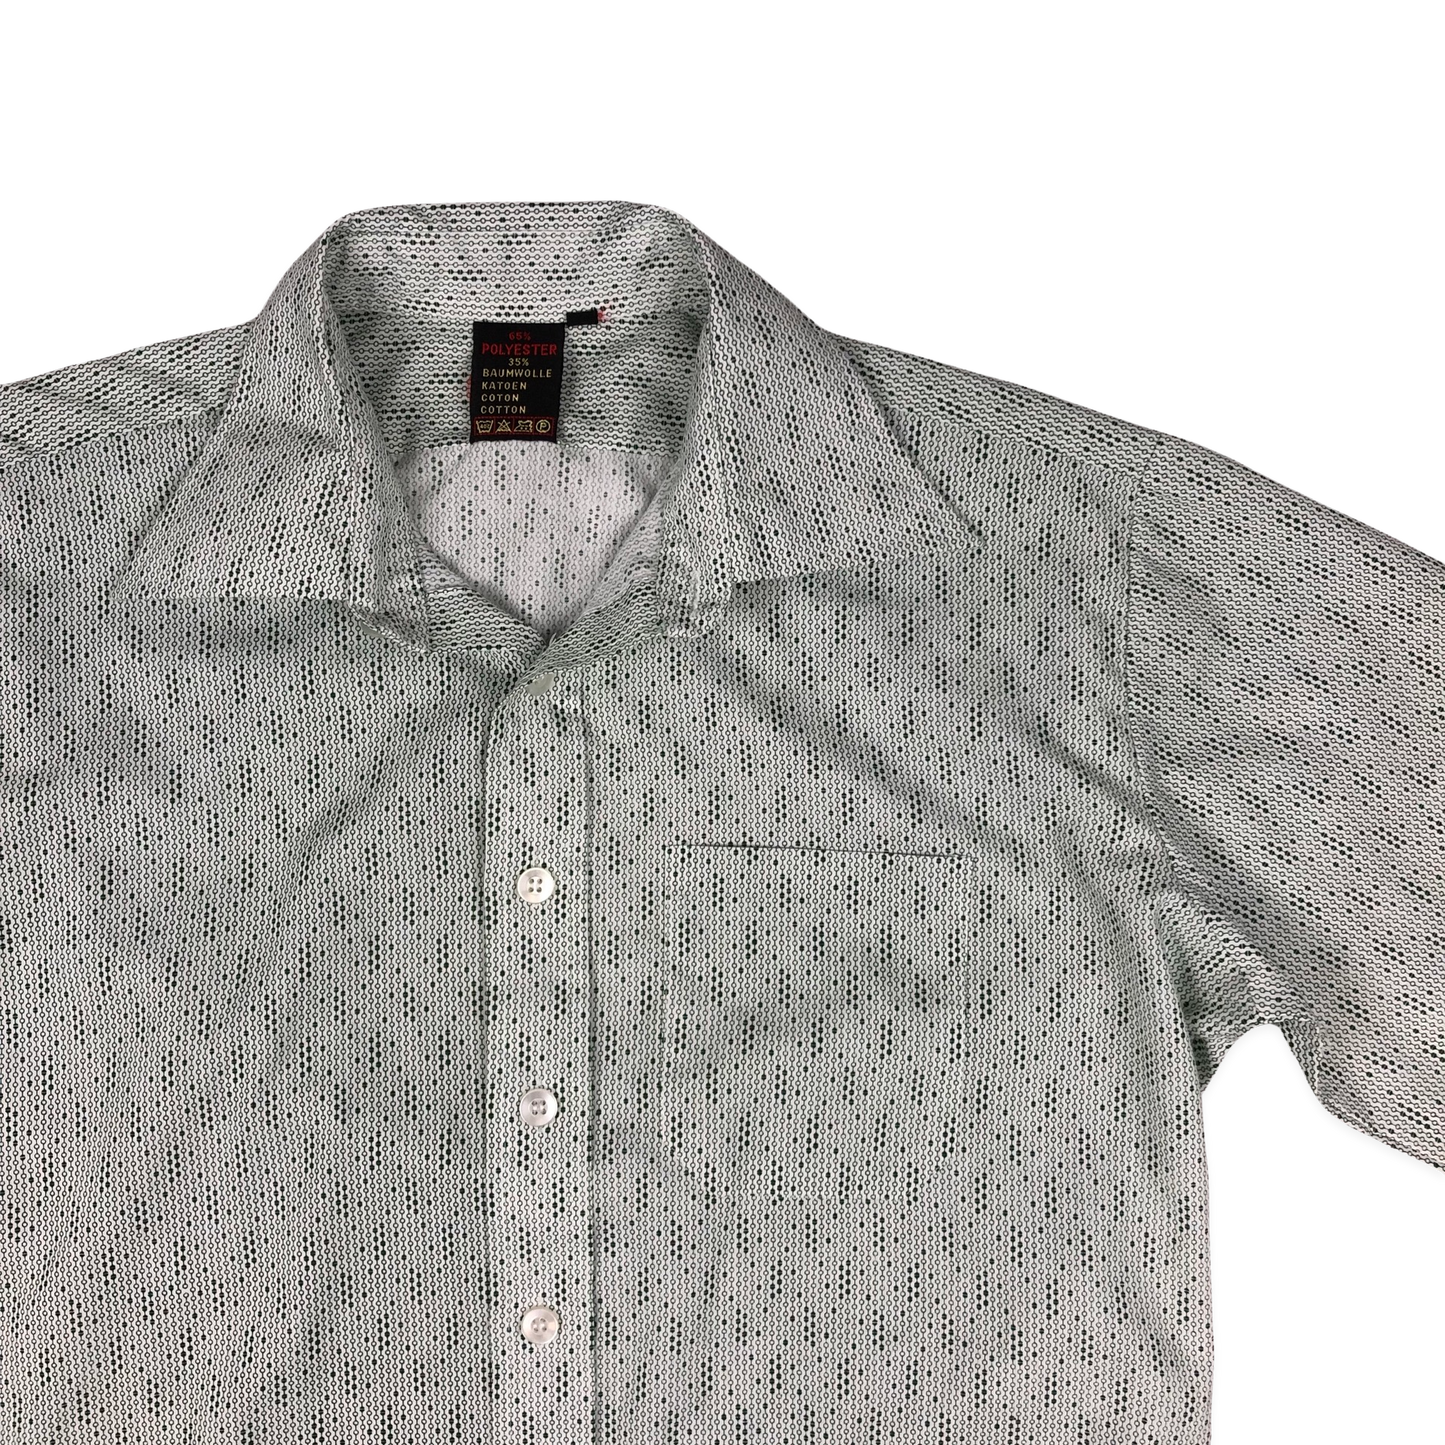 Vintage 70s Green and White Abstract Print Shirt L